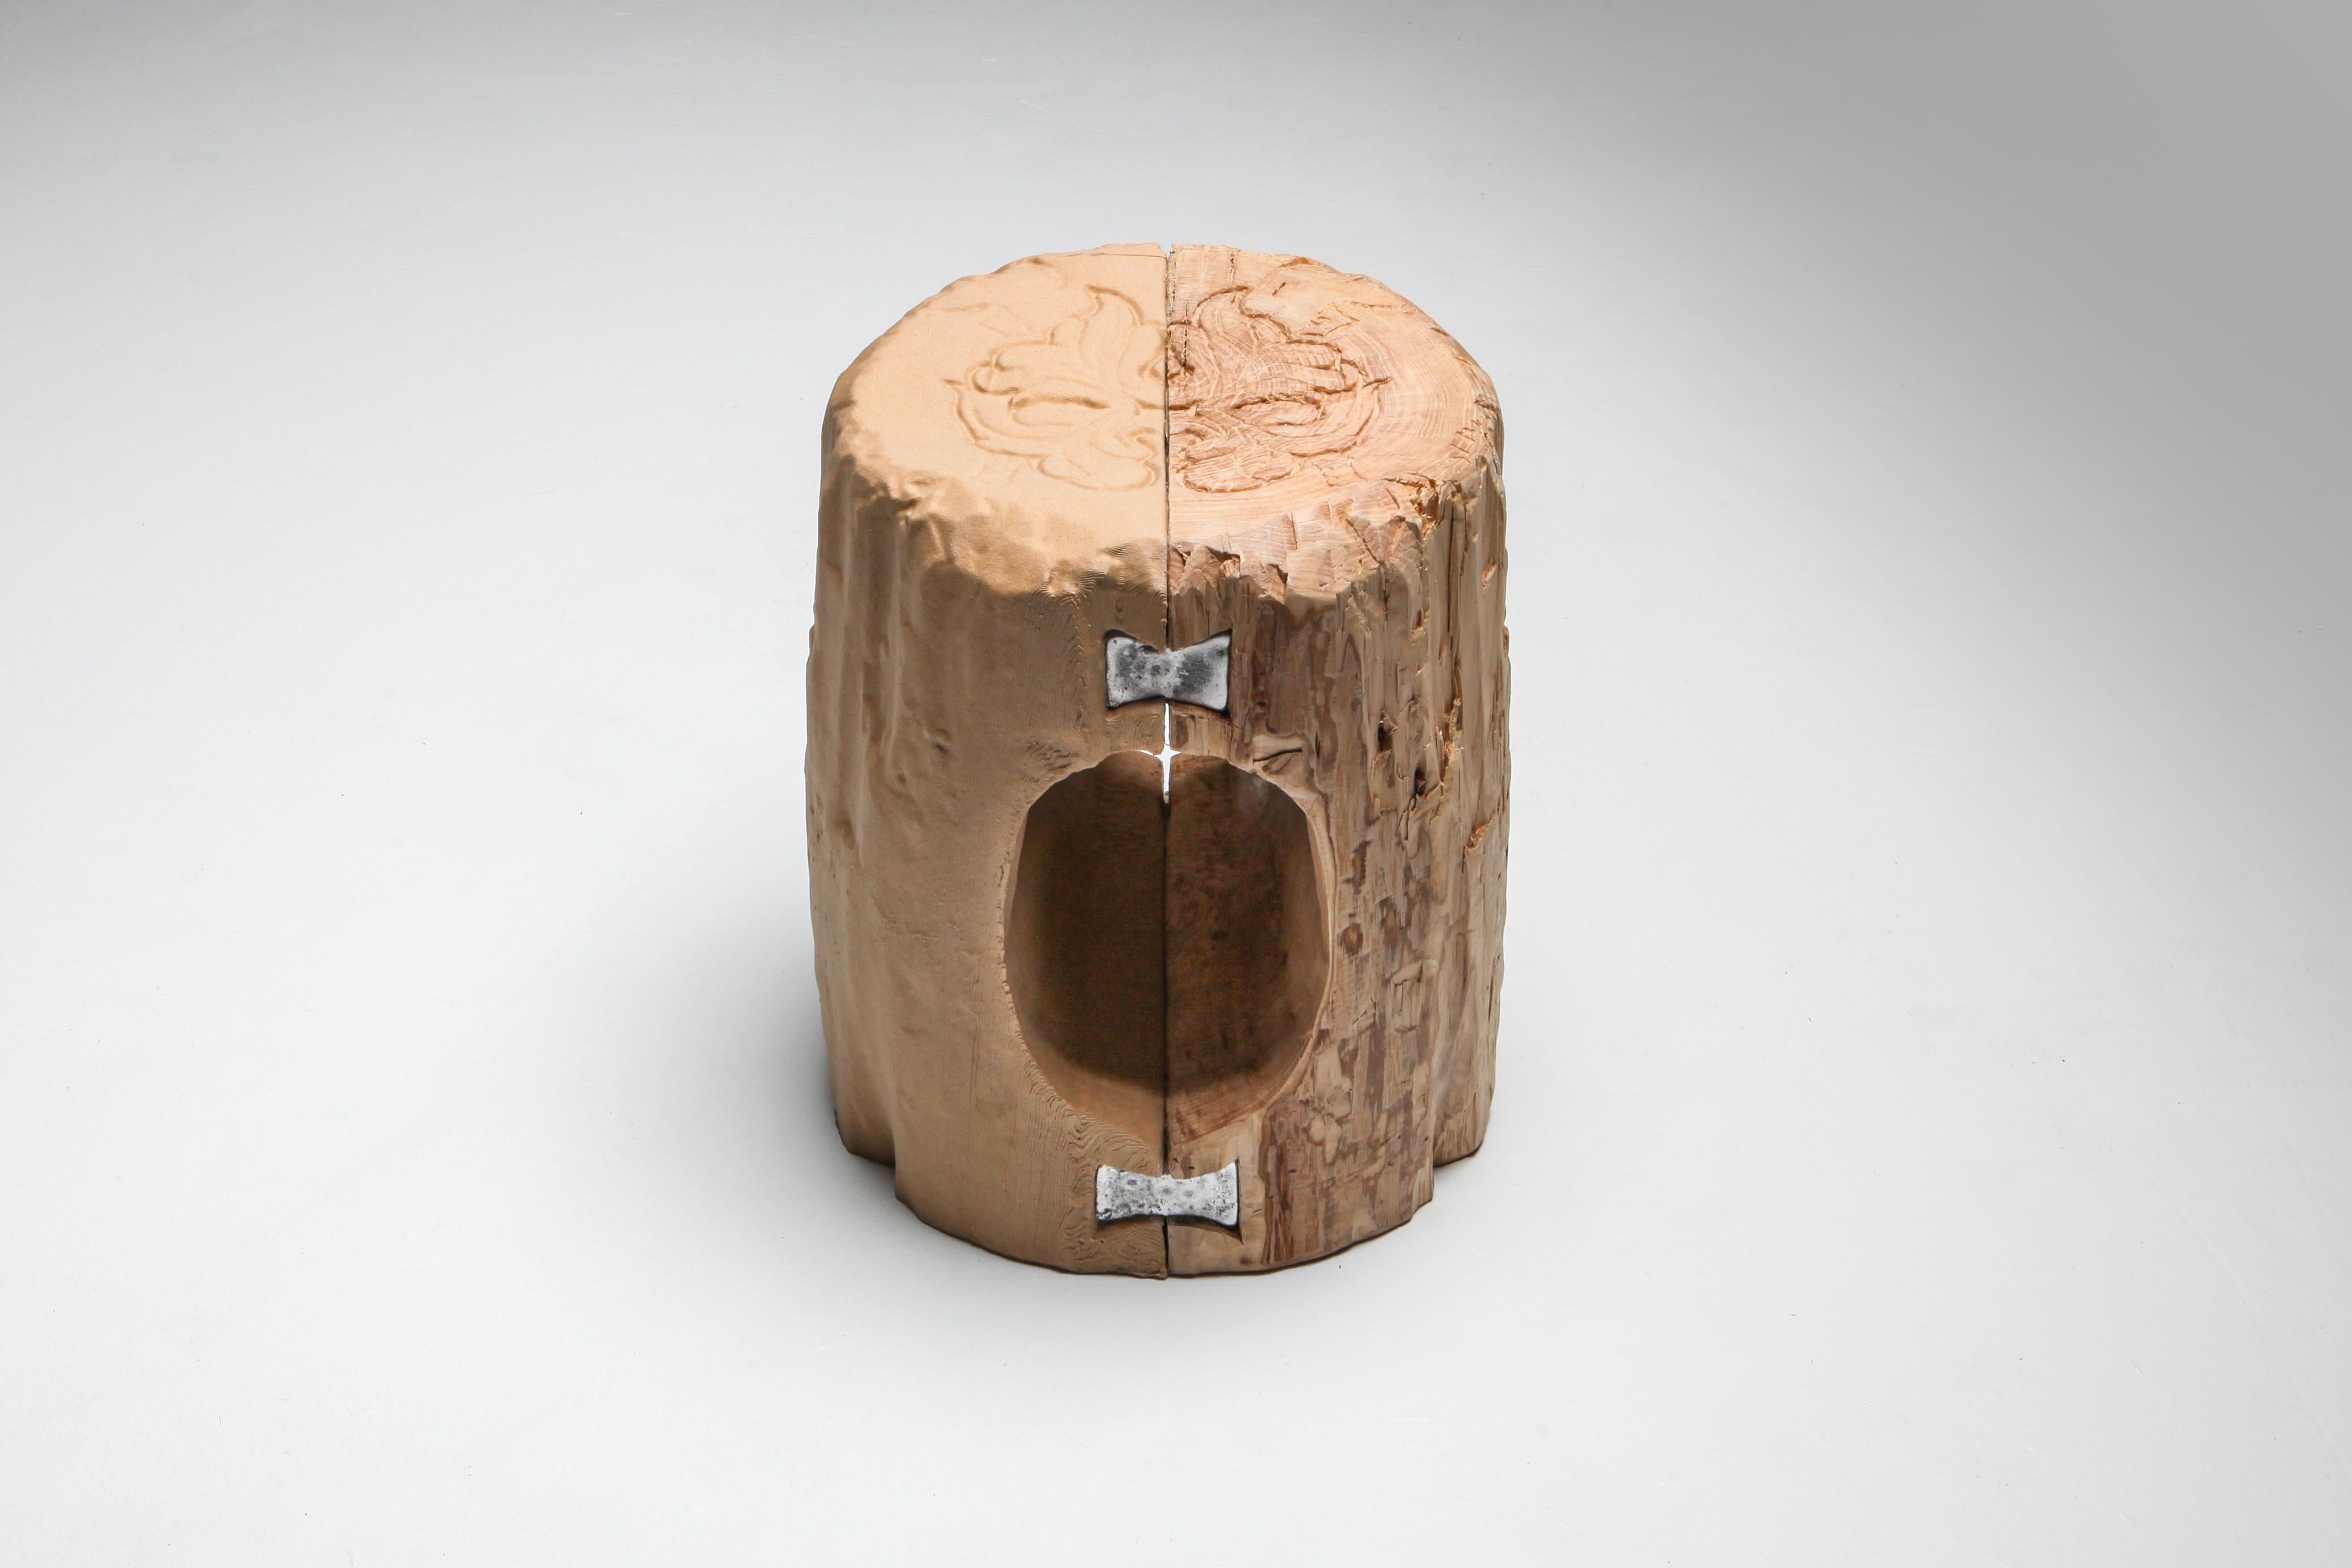 Echo stool (Dovetail)
Contemporary art, Functional art, 2020,
Wood, wood filament, resin, acrylic plaster, PU-foam and hardware
Measures: H 45.9, W 34.8, D 25 cm

This unique piece was exhibited in Schimmel & Schweikle's solo show 'A tree full of